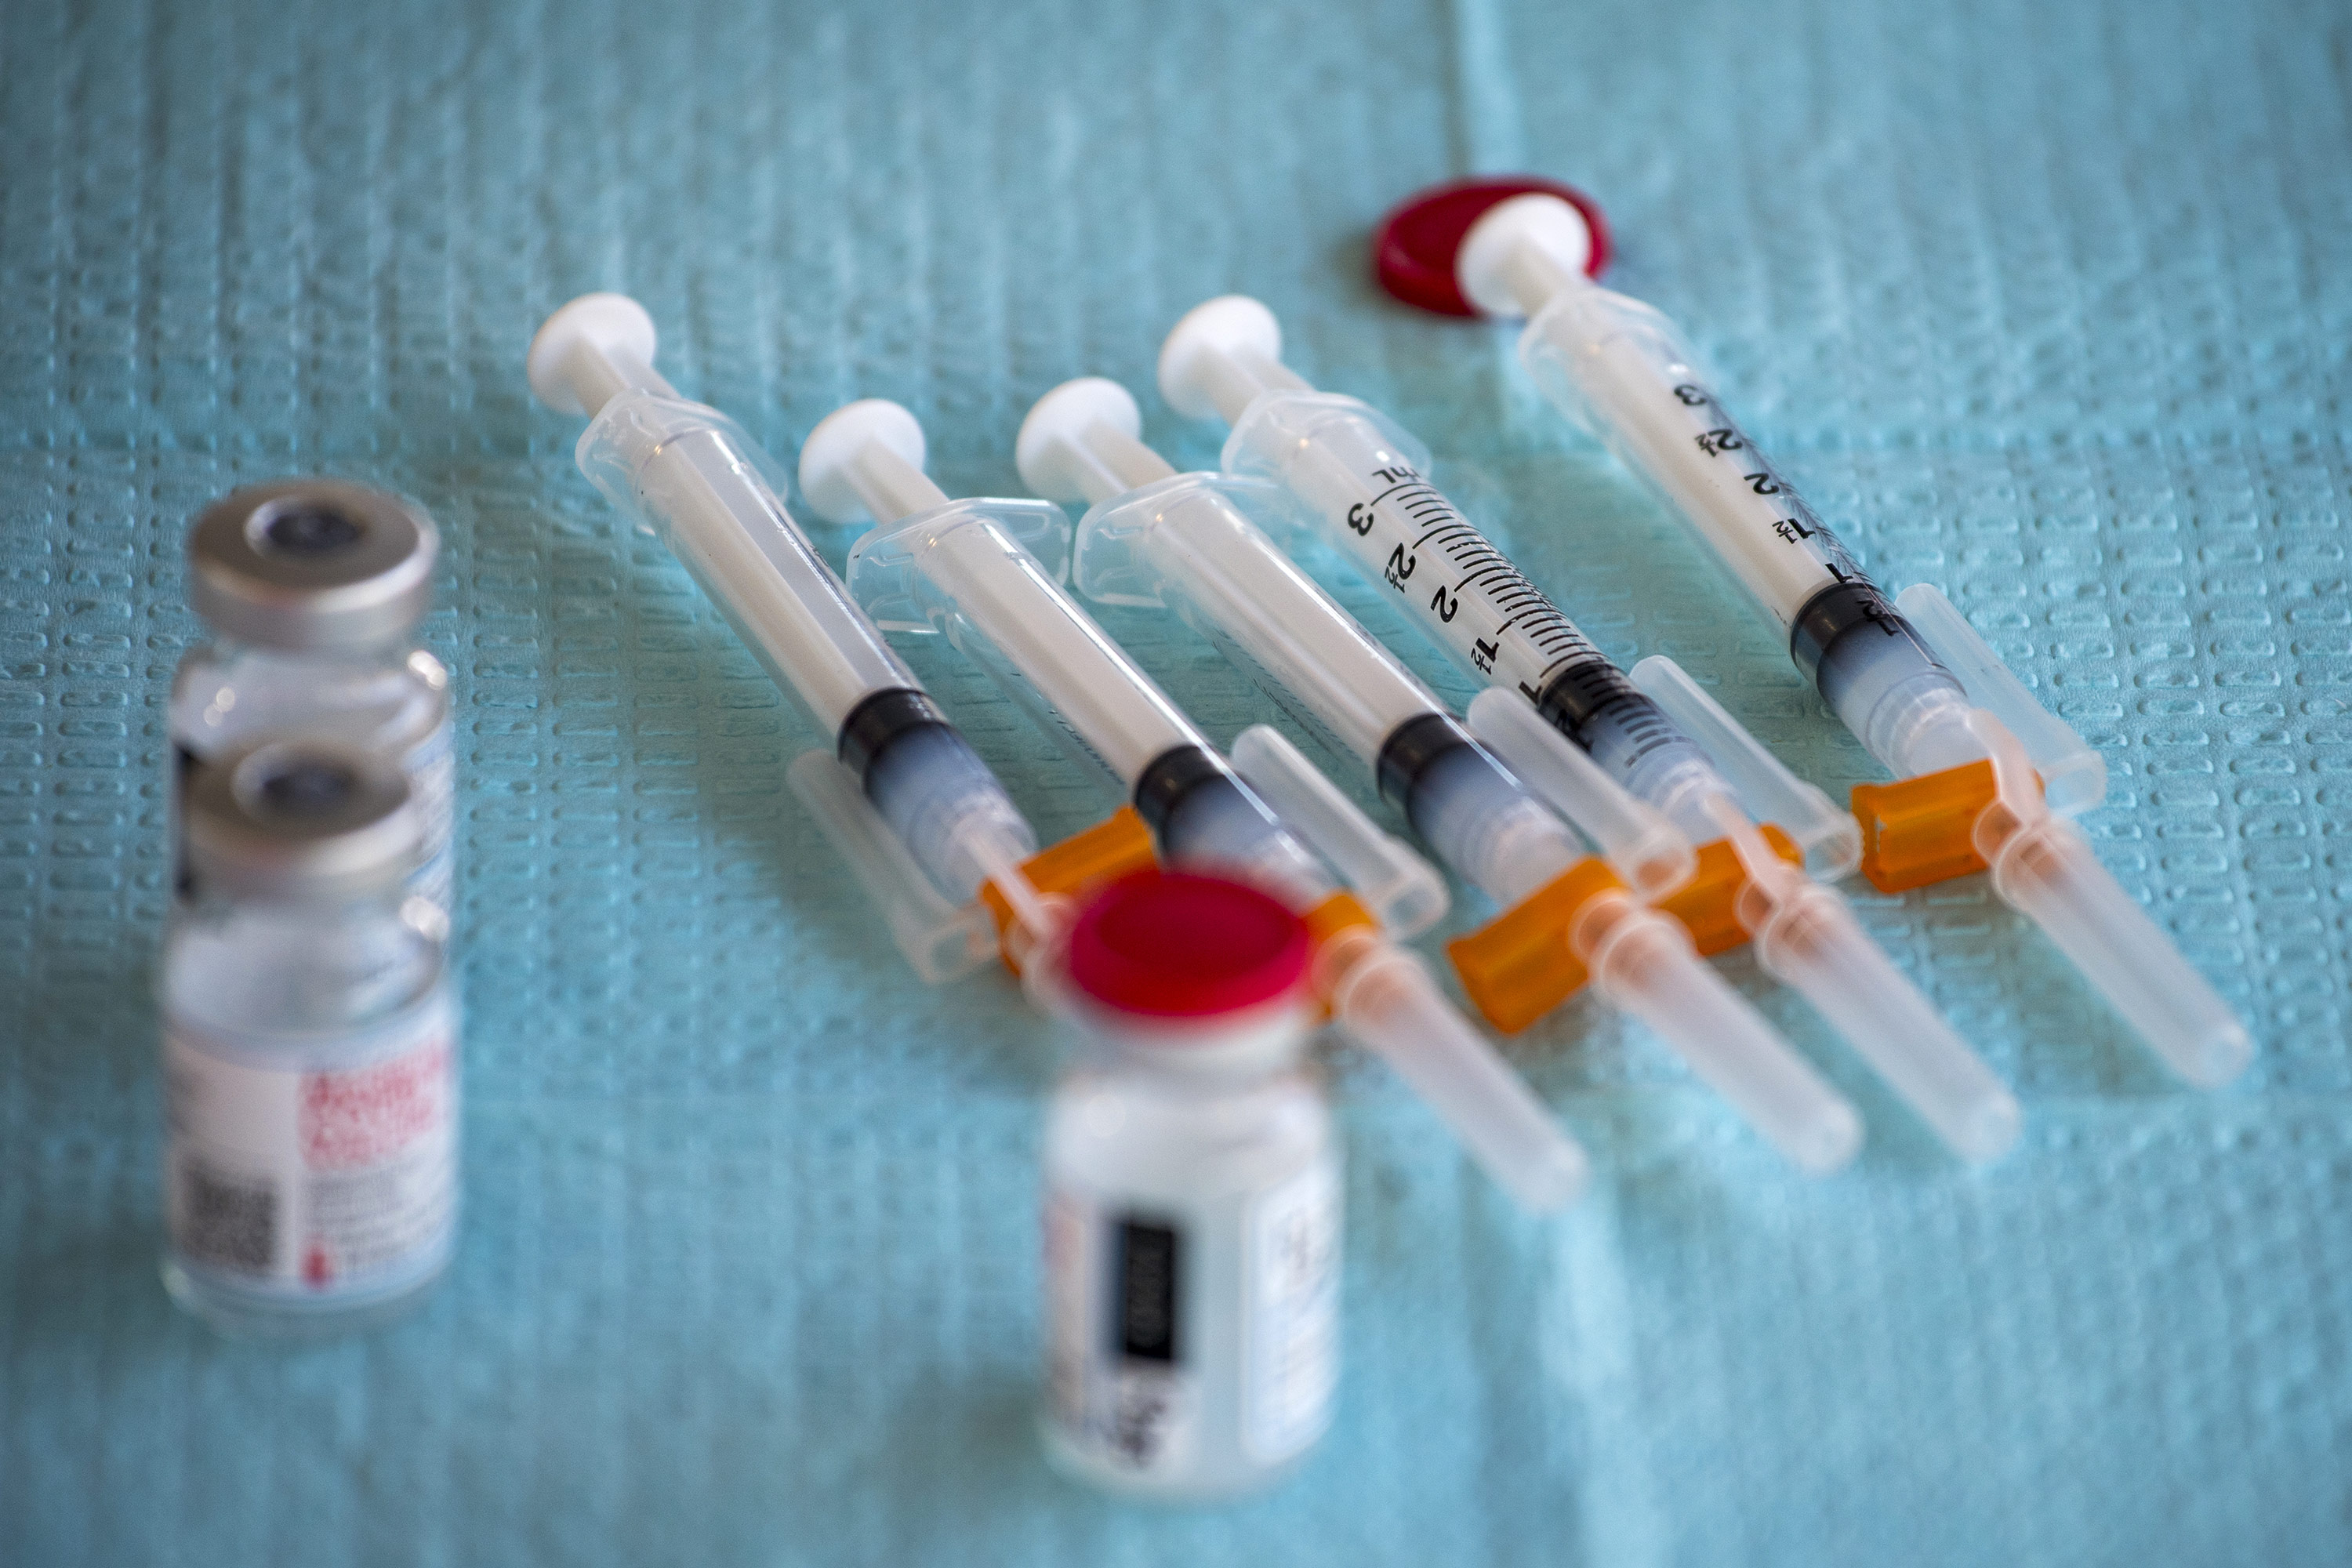 Syringes of the Moderna Covid-19 vaccine at a vaccination clinic organized by the Santa Clara County Public Health Department in Gilroy, California, on Thursday, March 4. 